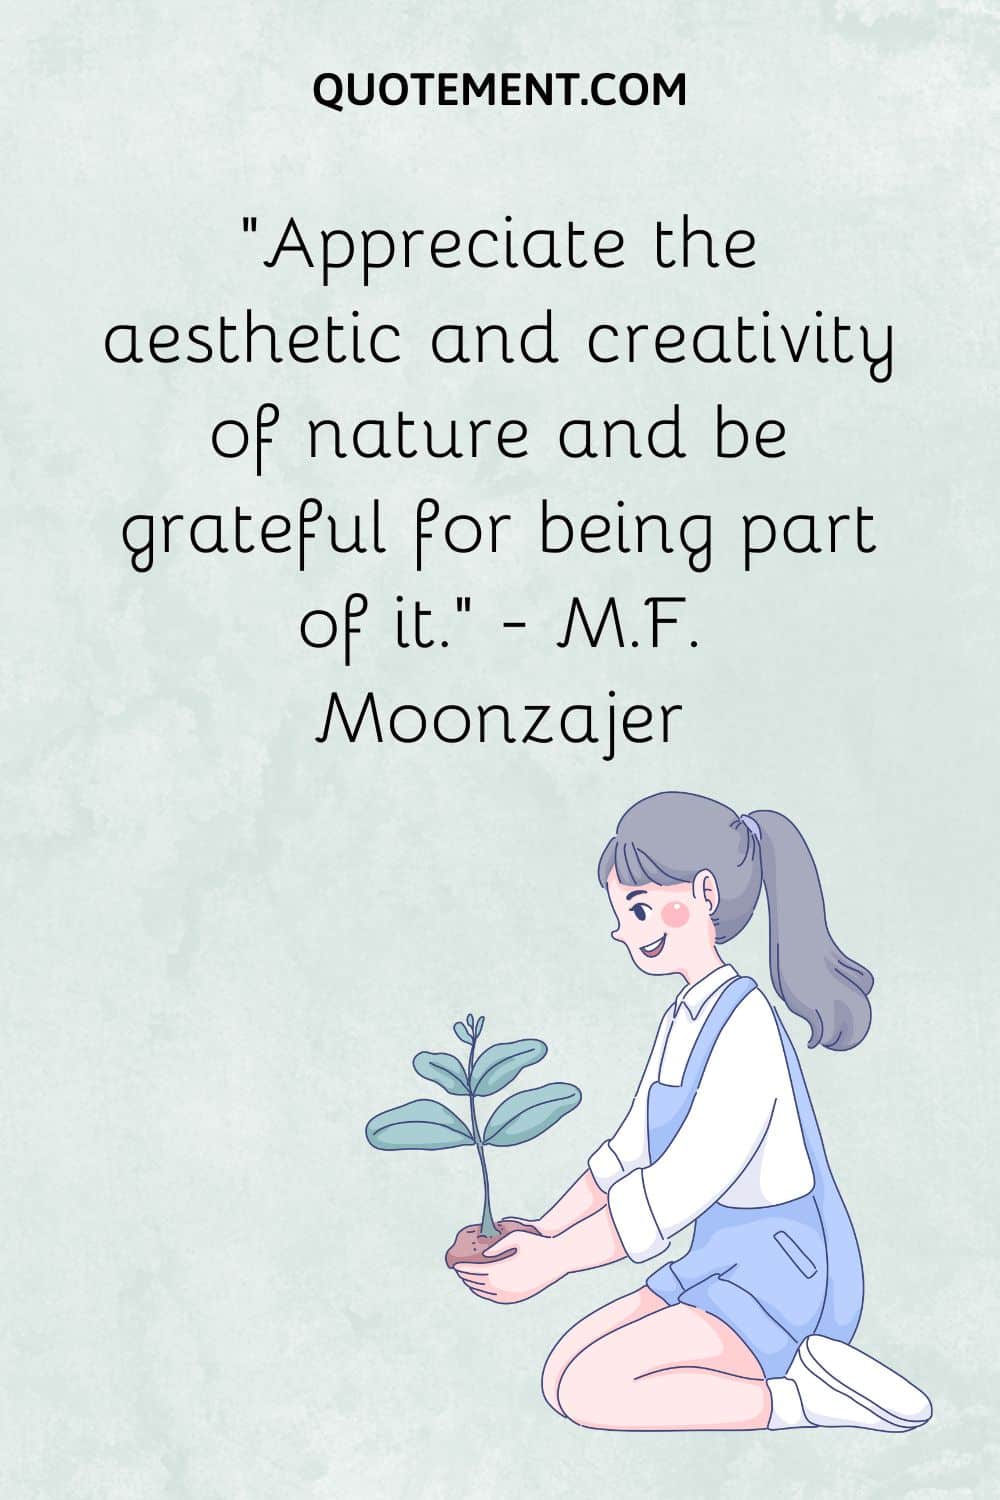 Appreciate the aesthetic and creativity of nature and be grateful for being part of it